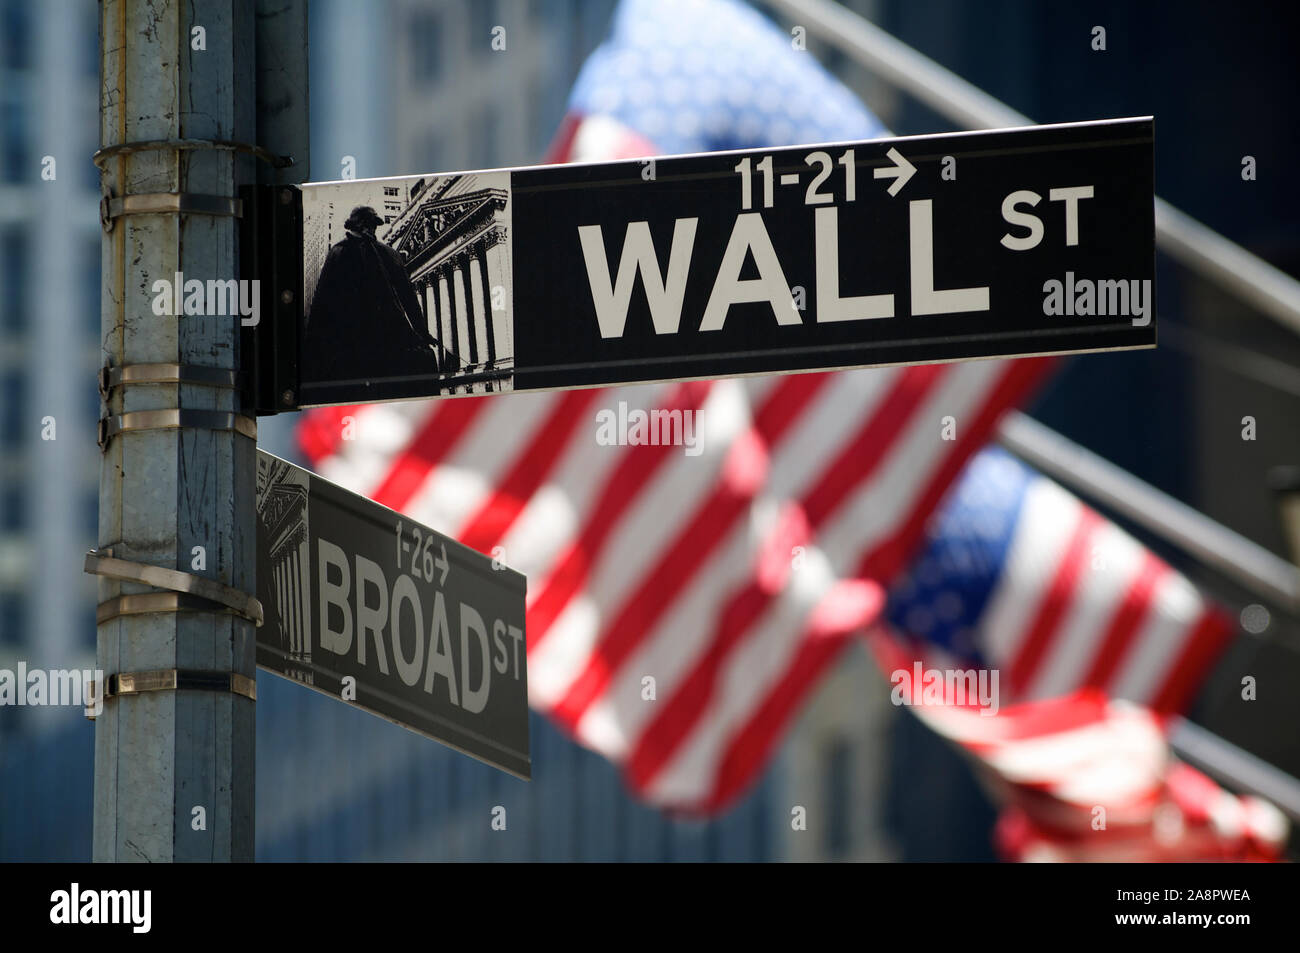 NEW YORK CITY - AUGUST 7, 2010: American flags fly behind a sign for Wall Street, symbol of American capitalism. Stock Photo